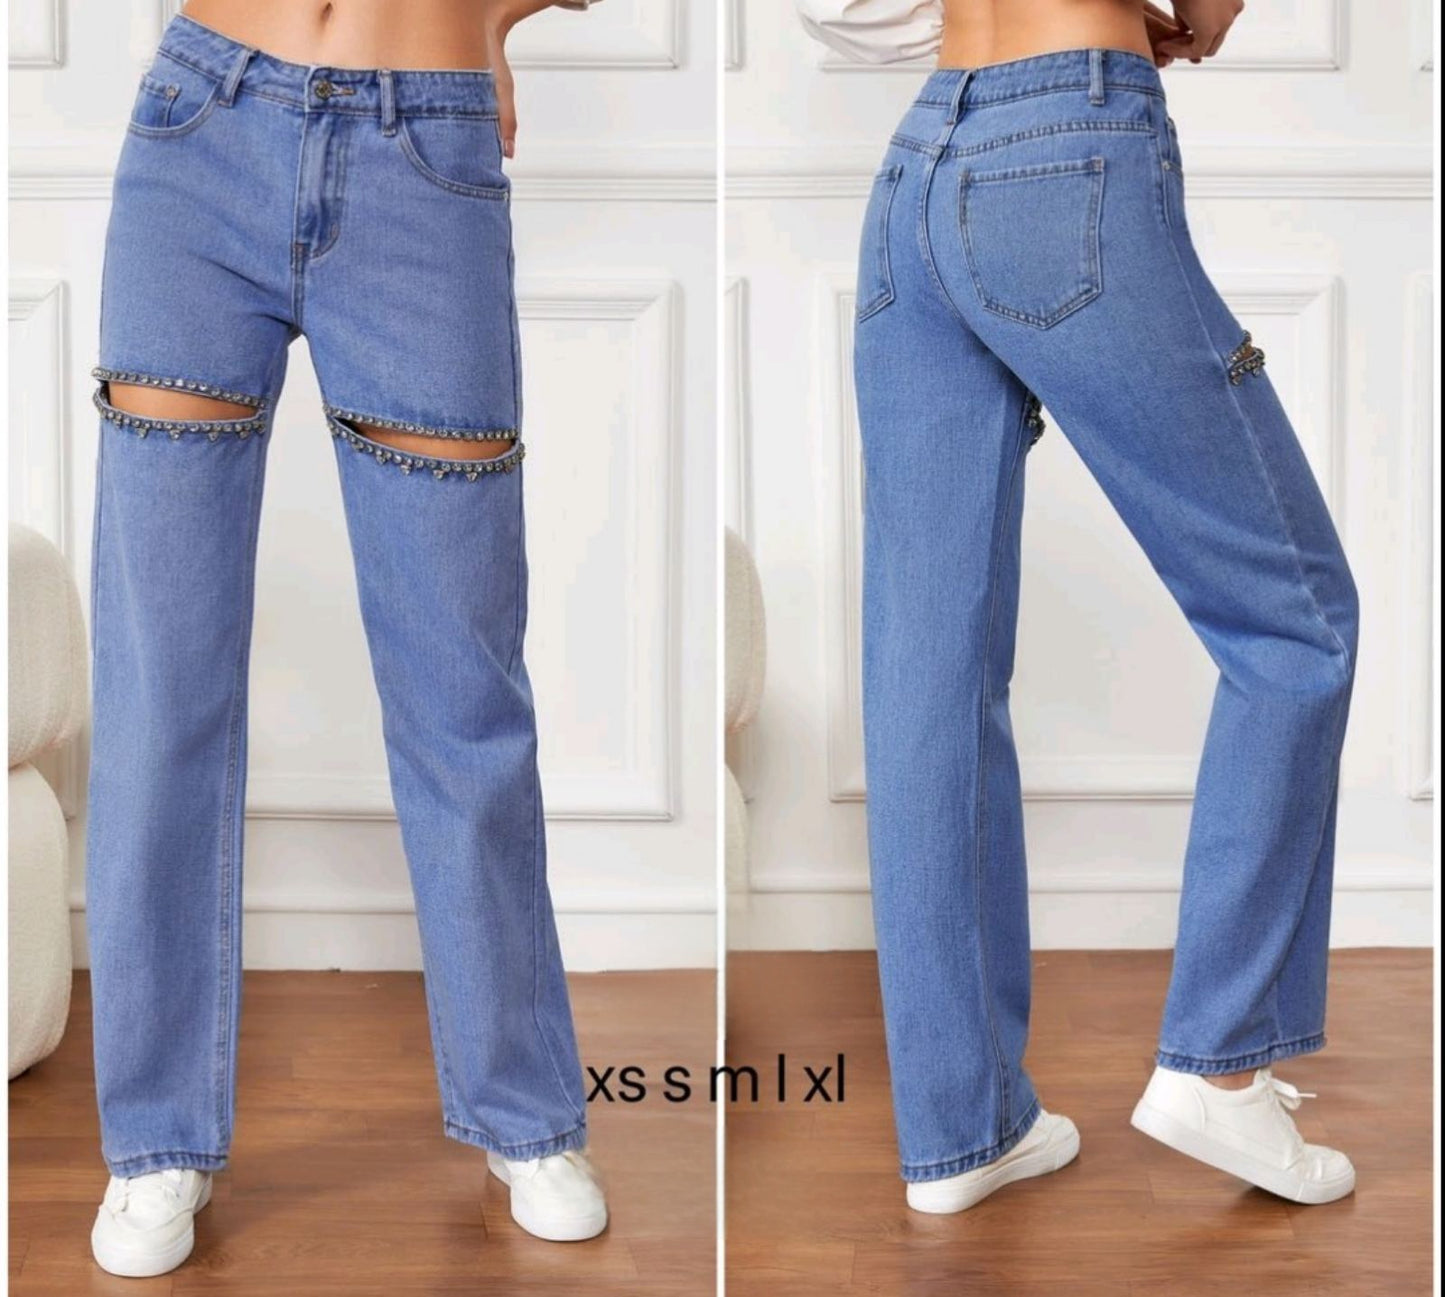 Jeans with strass